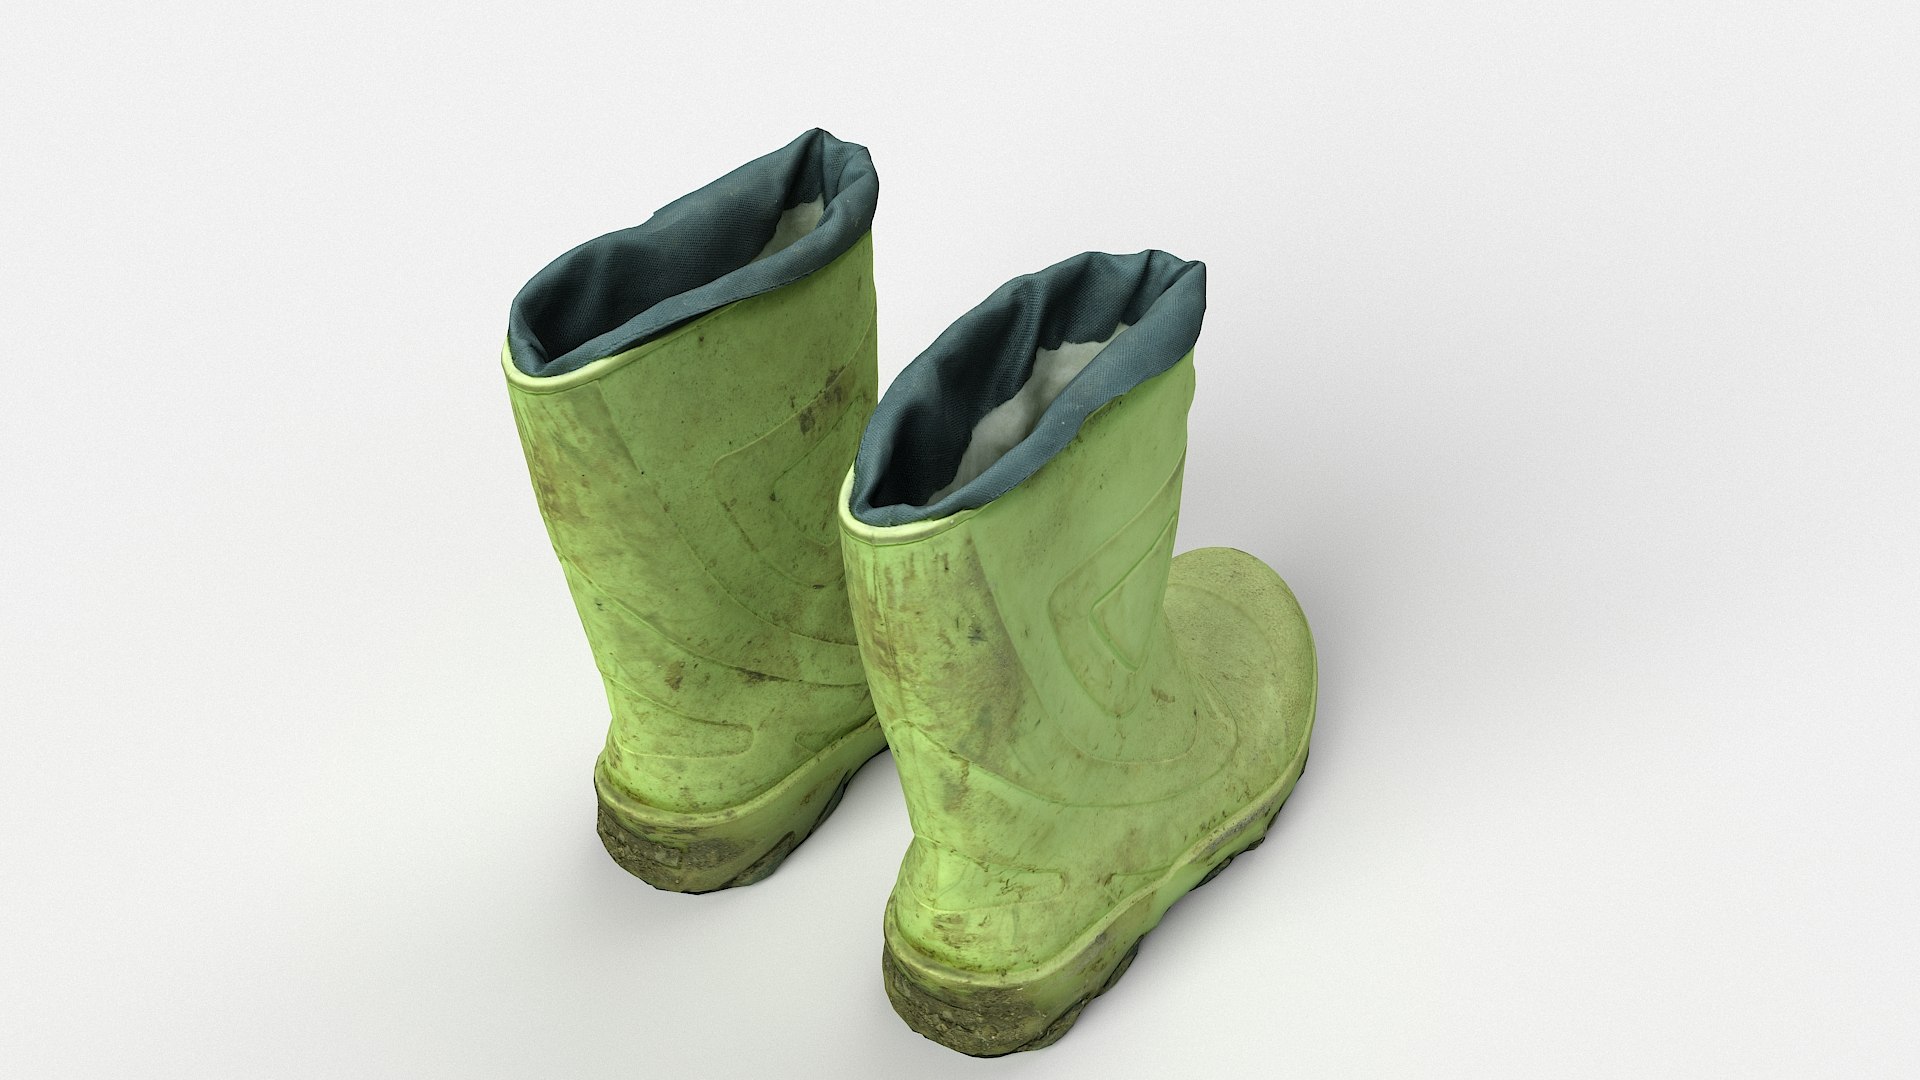 Dirty Rubber Boots 3D Model - TurboSquid 1580902